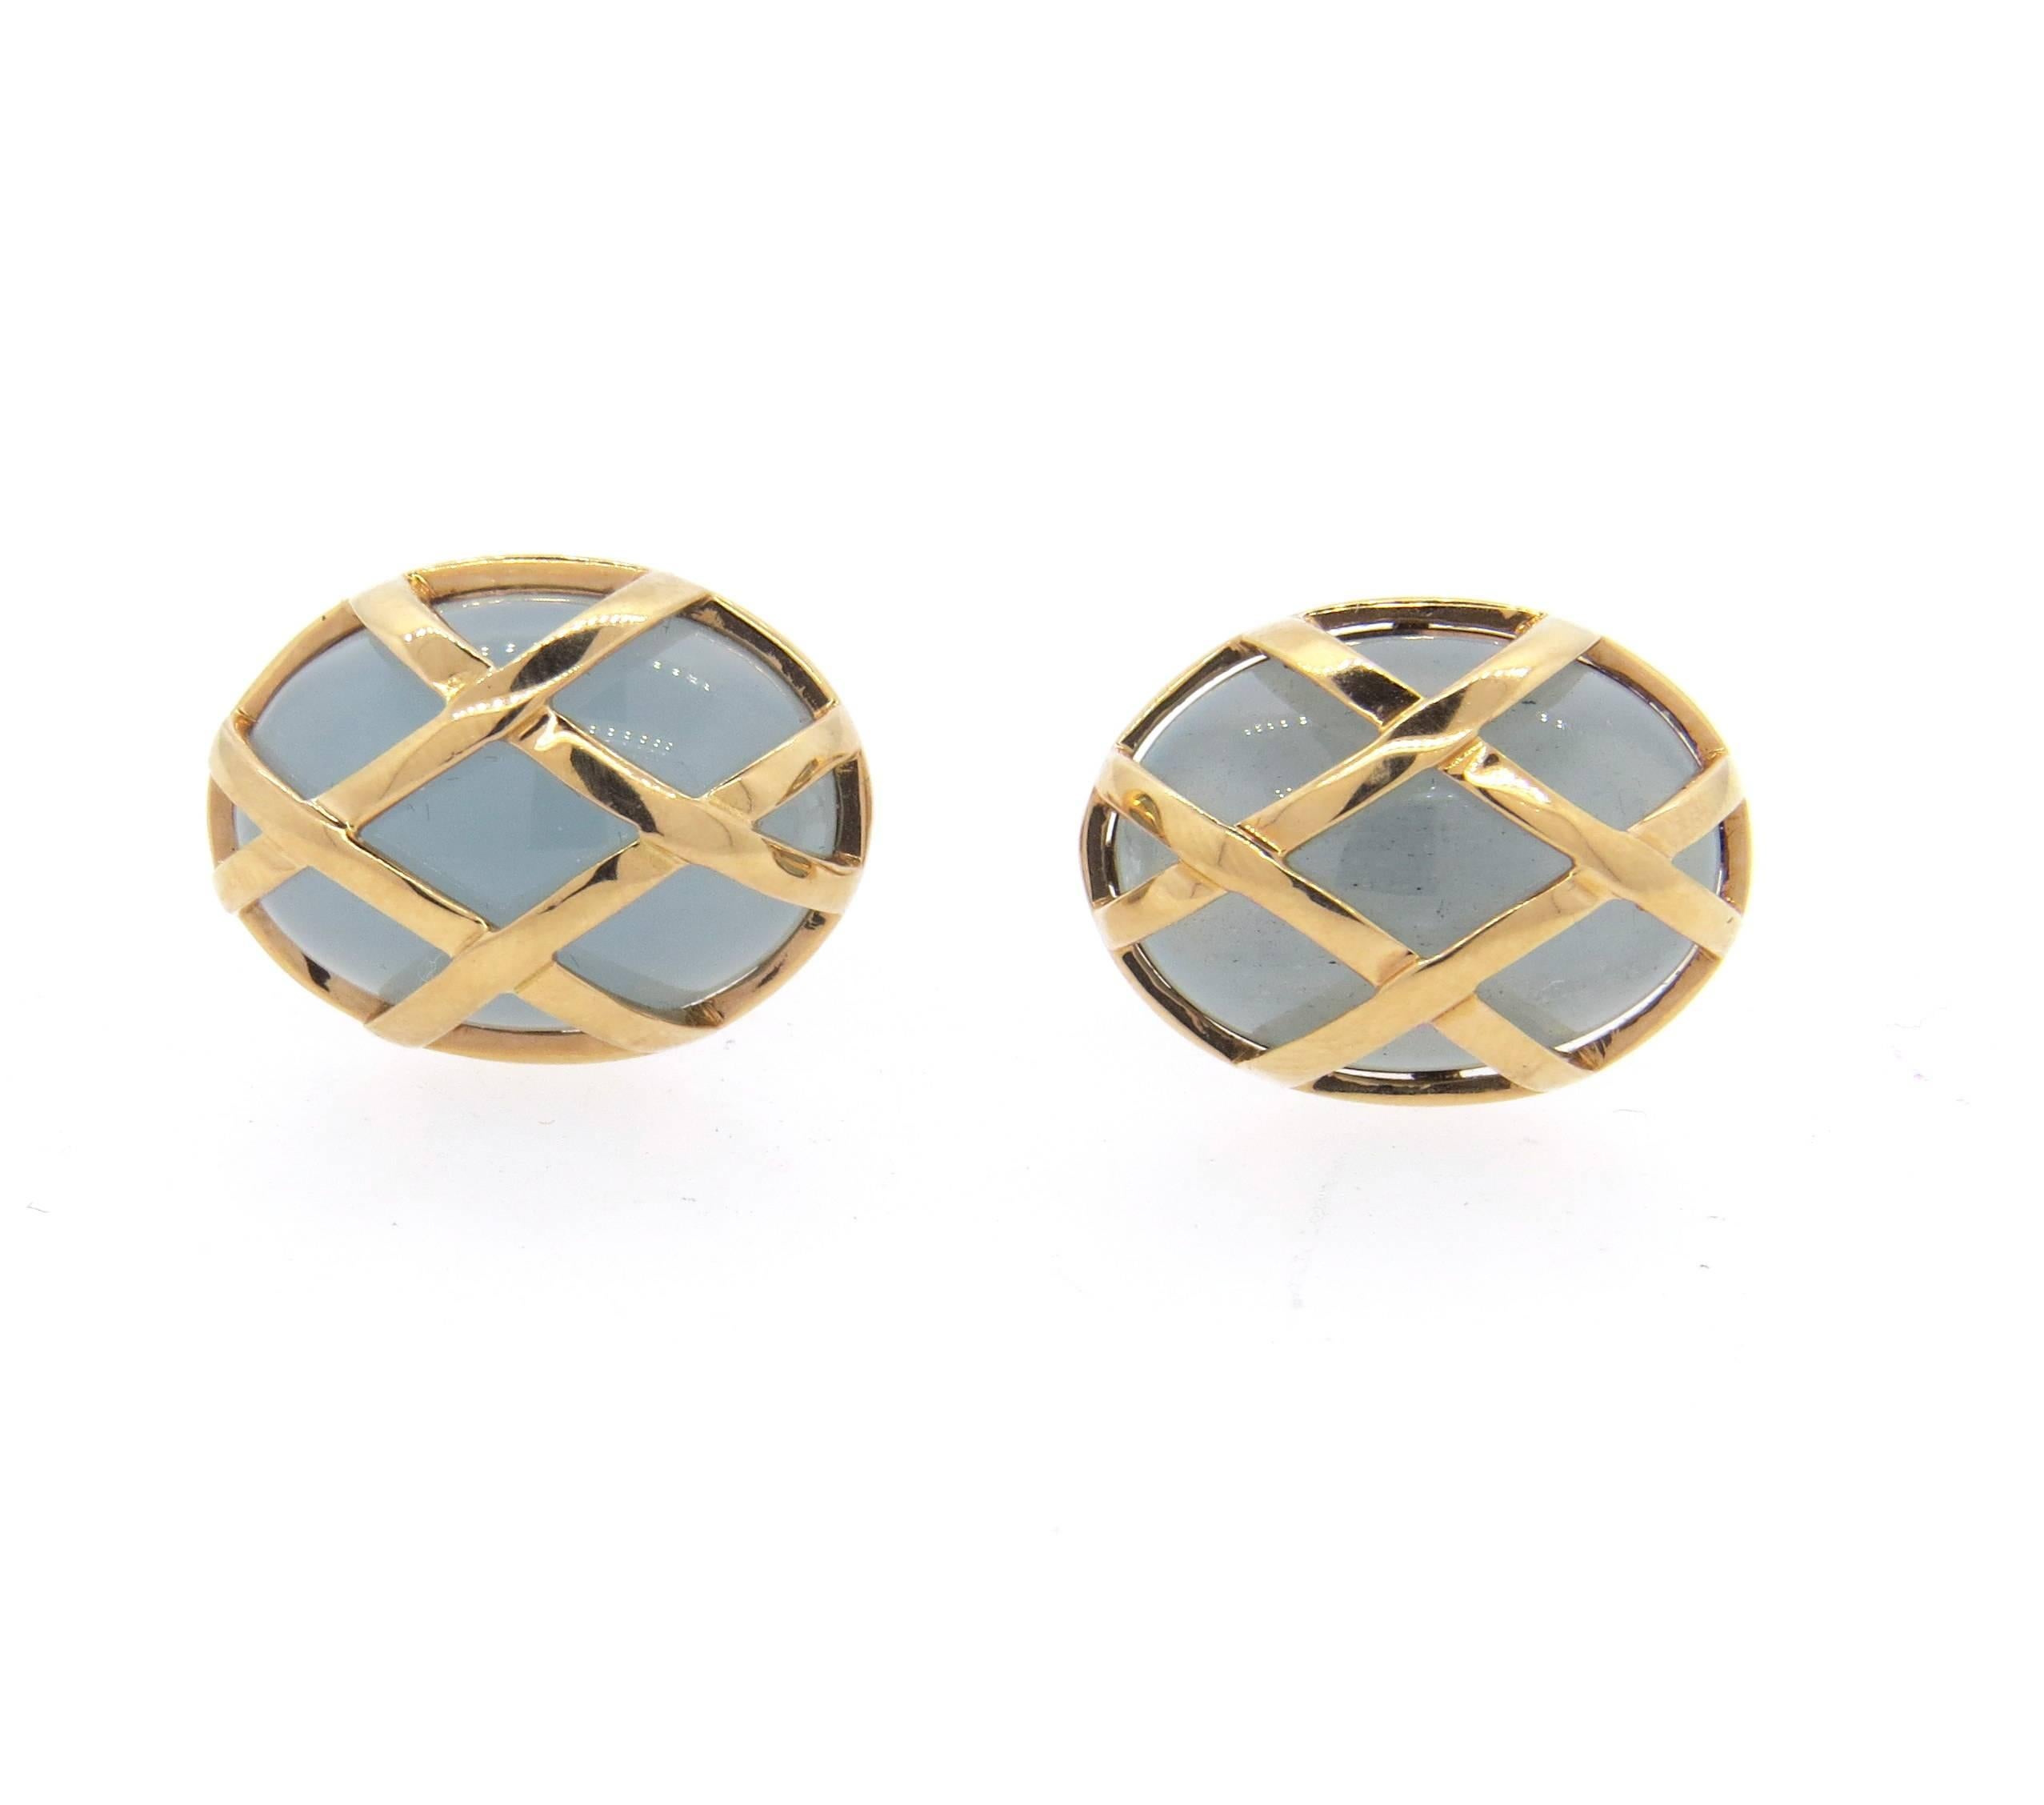 Pair of new 18k rose gold cufflinks, crafted by Favero, featuring milky aquamarines. Each top measures 19mm x15mm. Marked Favero, 750. Weight - 18.9 grams
Retail $8750